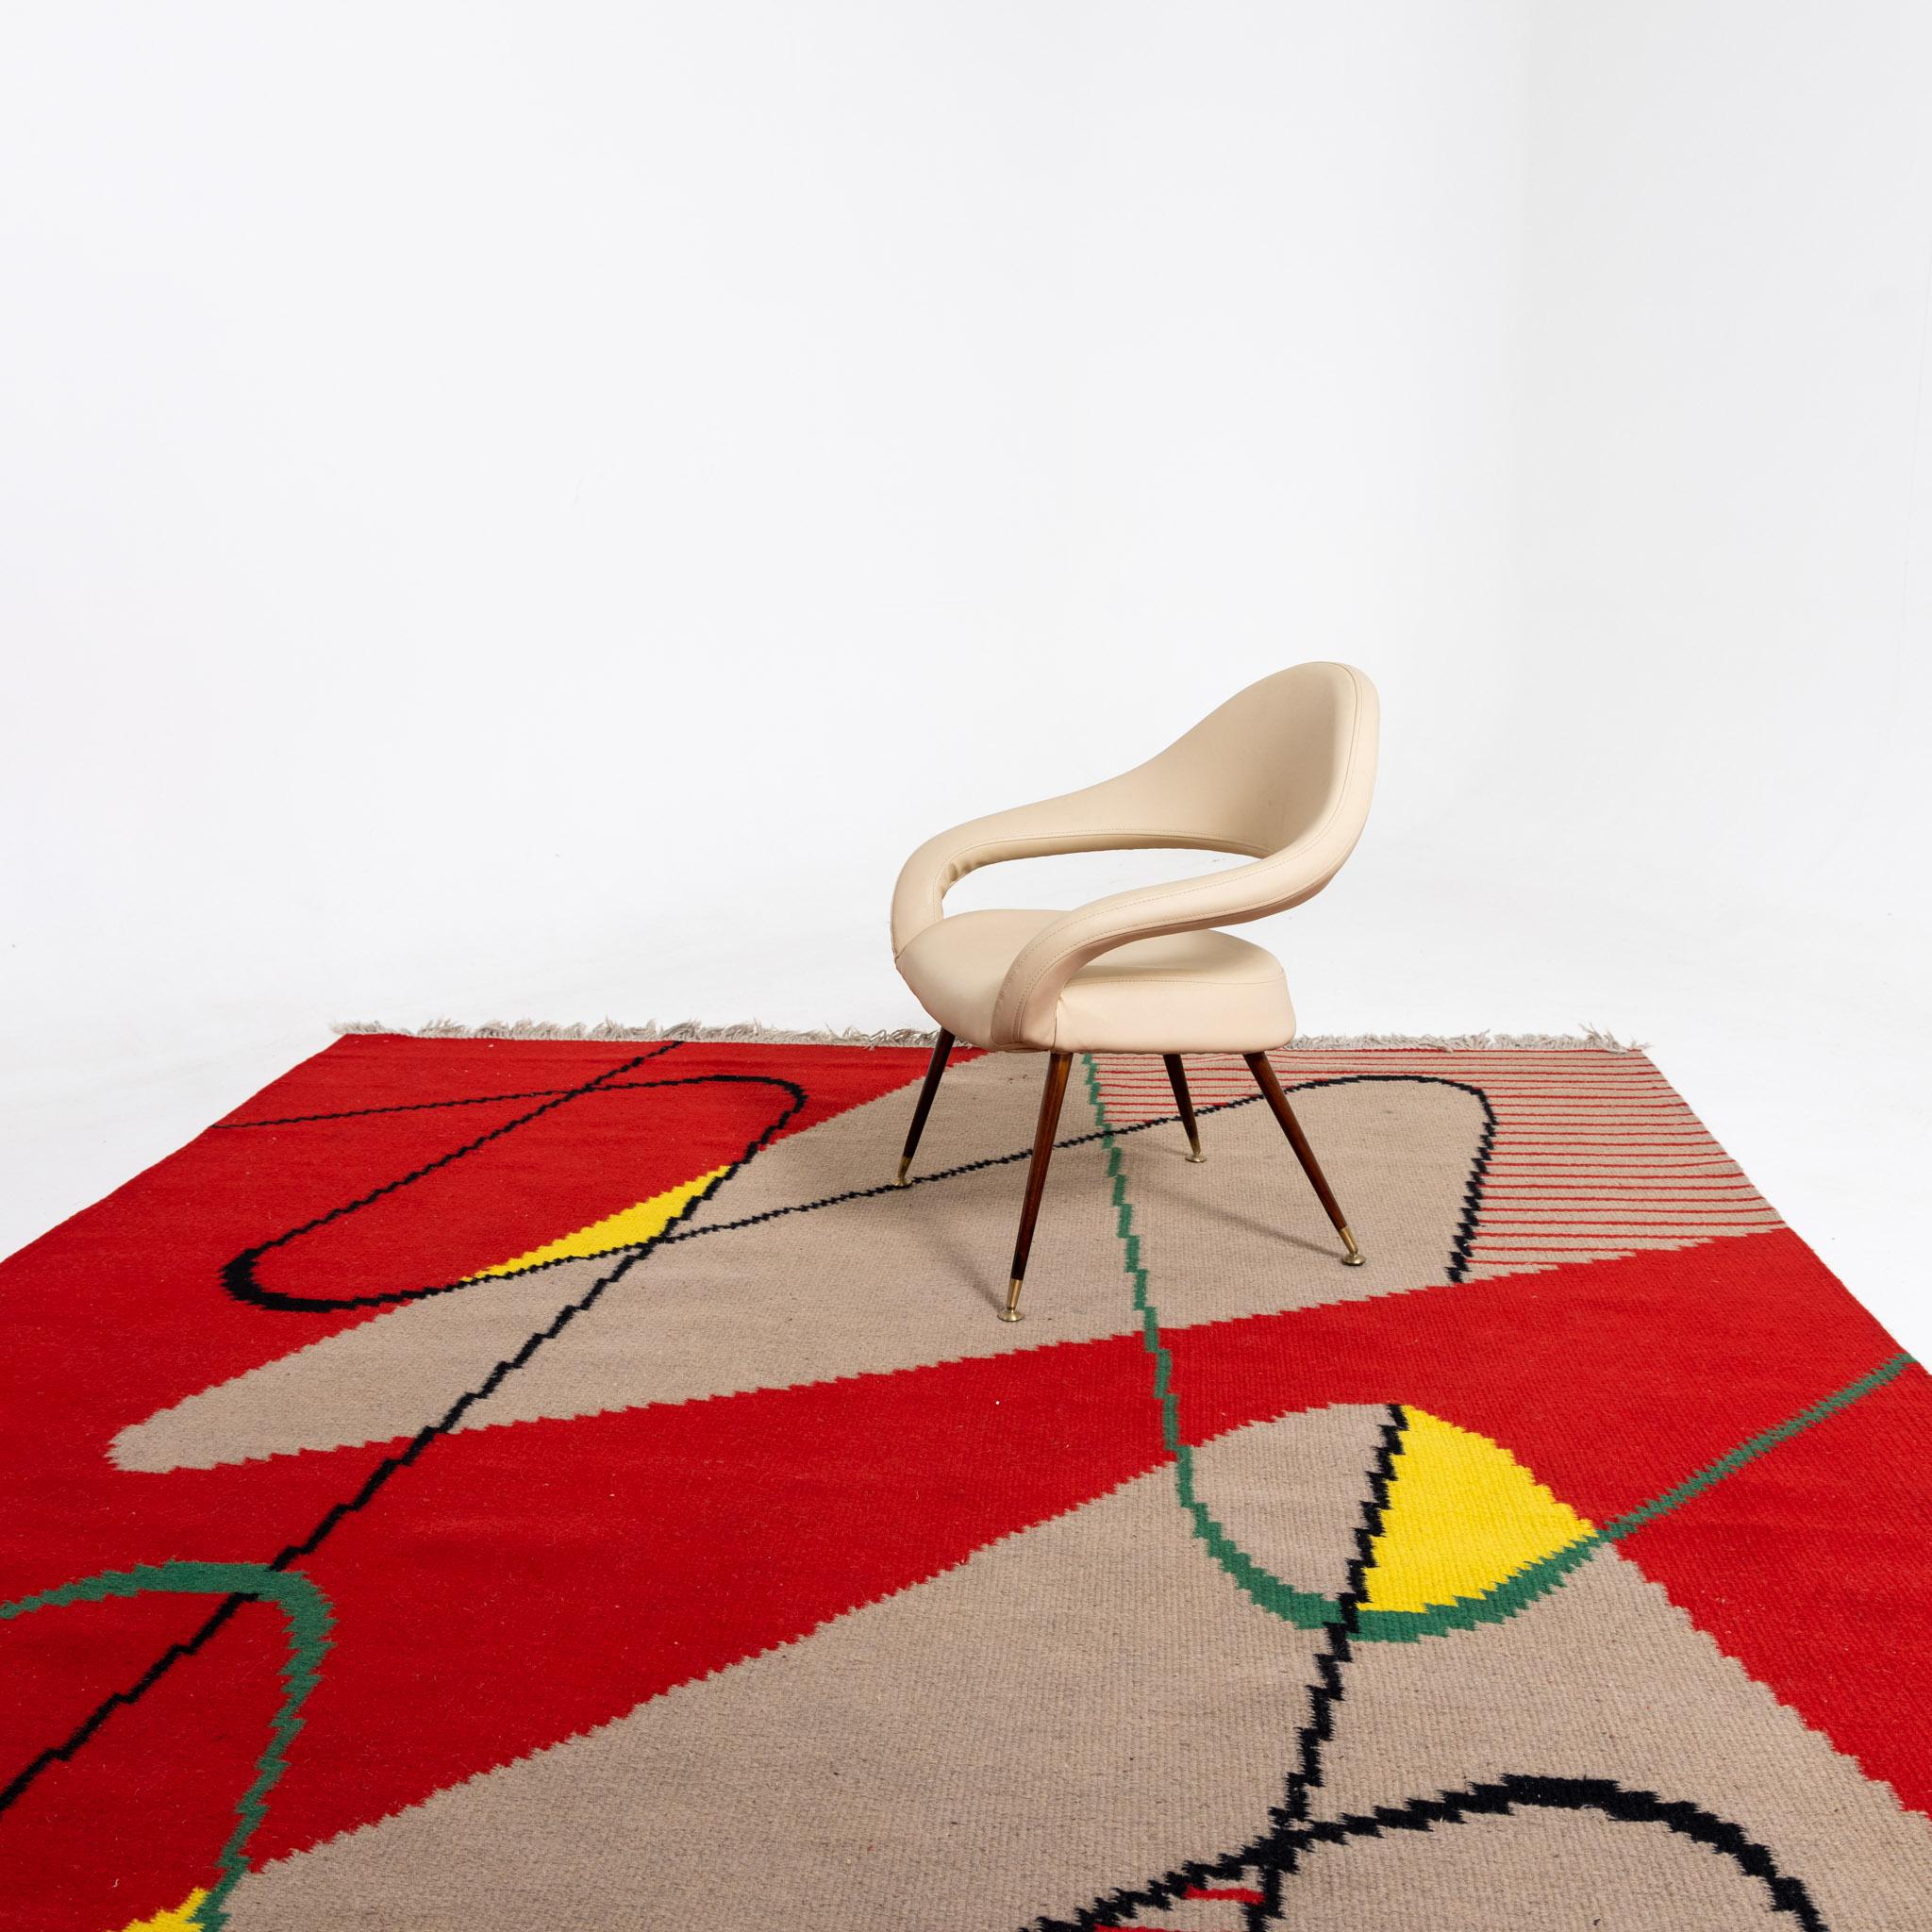 Geometric patterned wool rug in red, beige and yellow with green and black lines designed by Antonin Kybal in the 1950s.